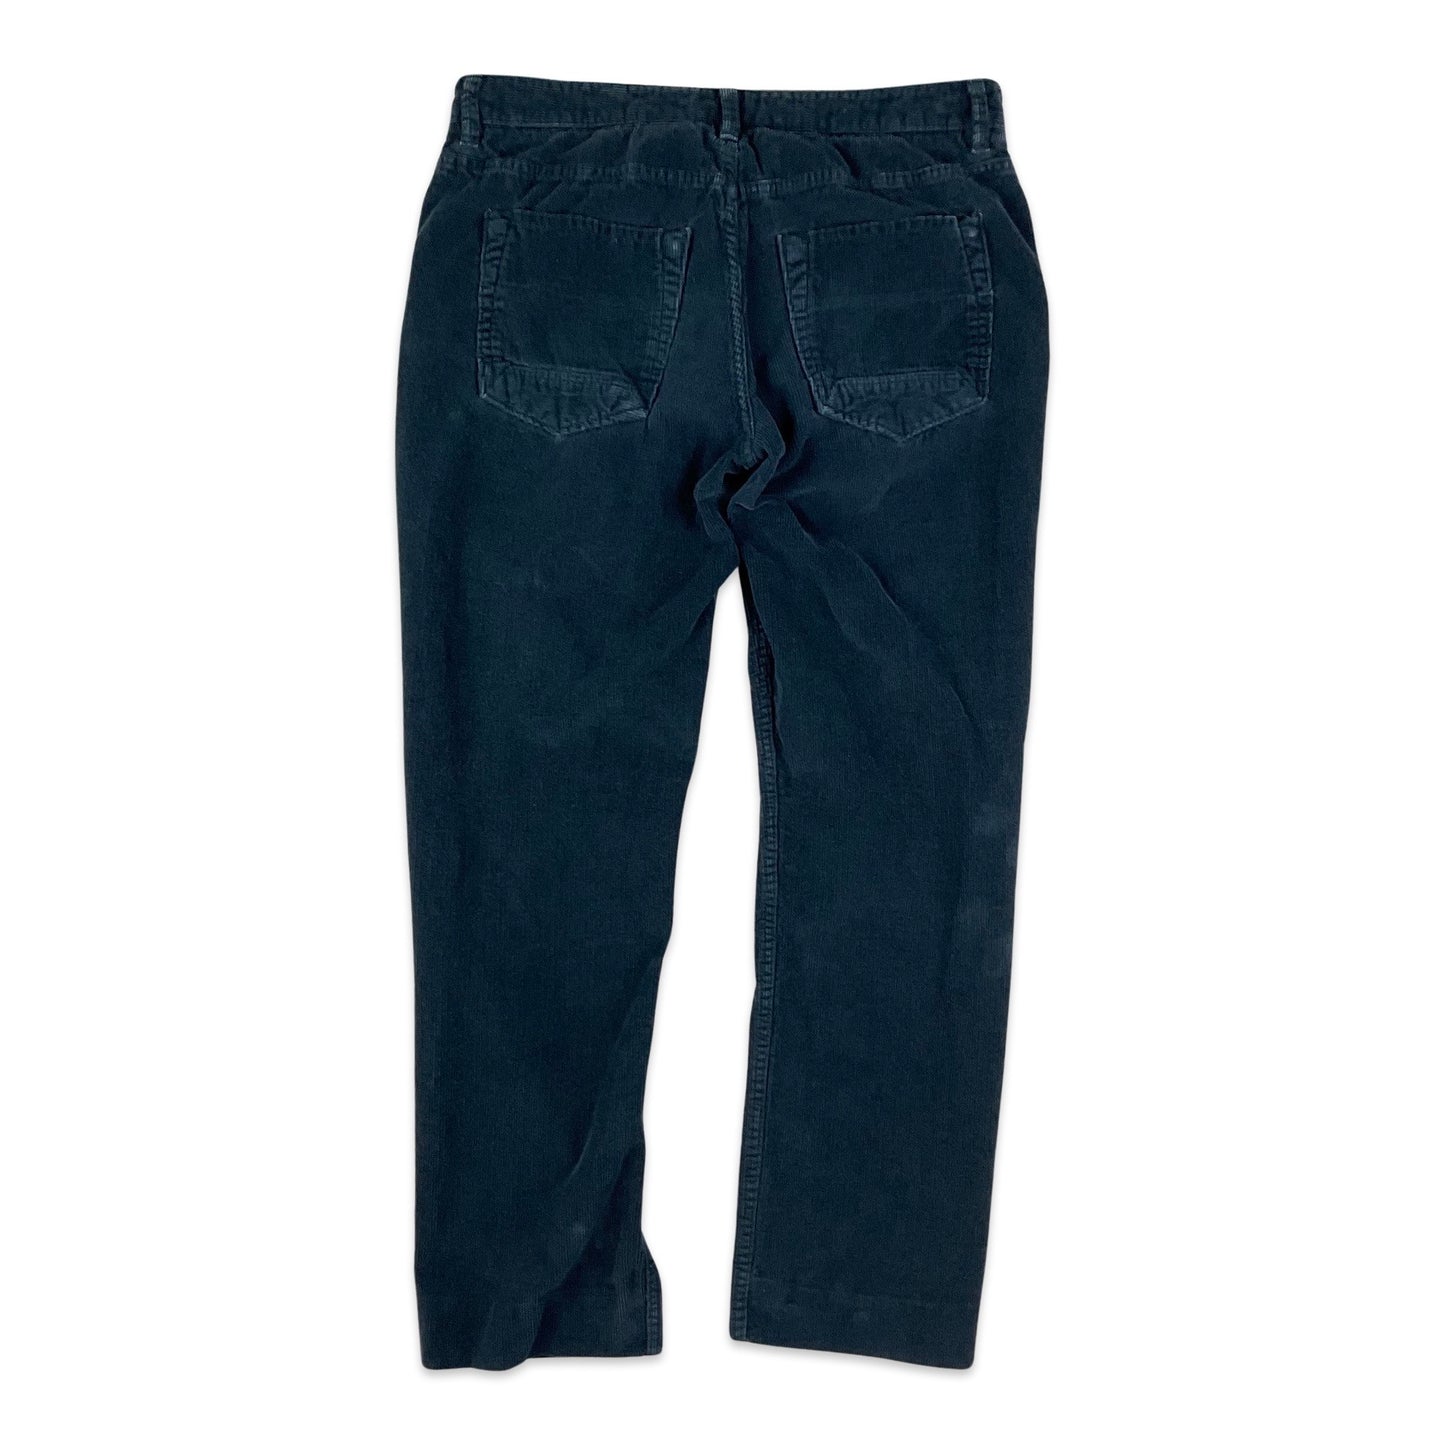 Timberland Navy Corduroy Trousers 35W 29L